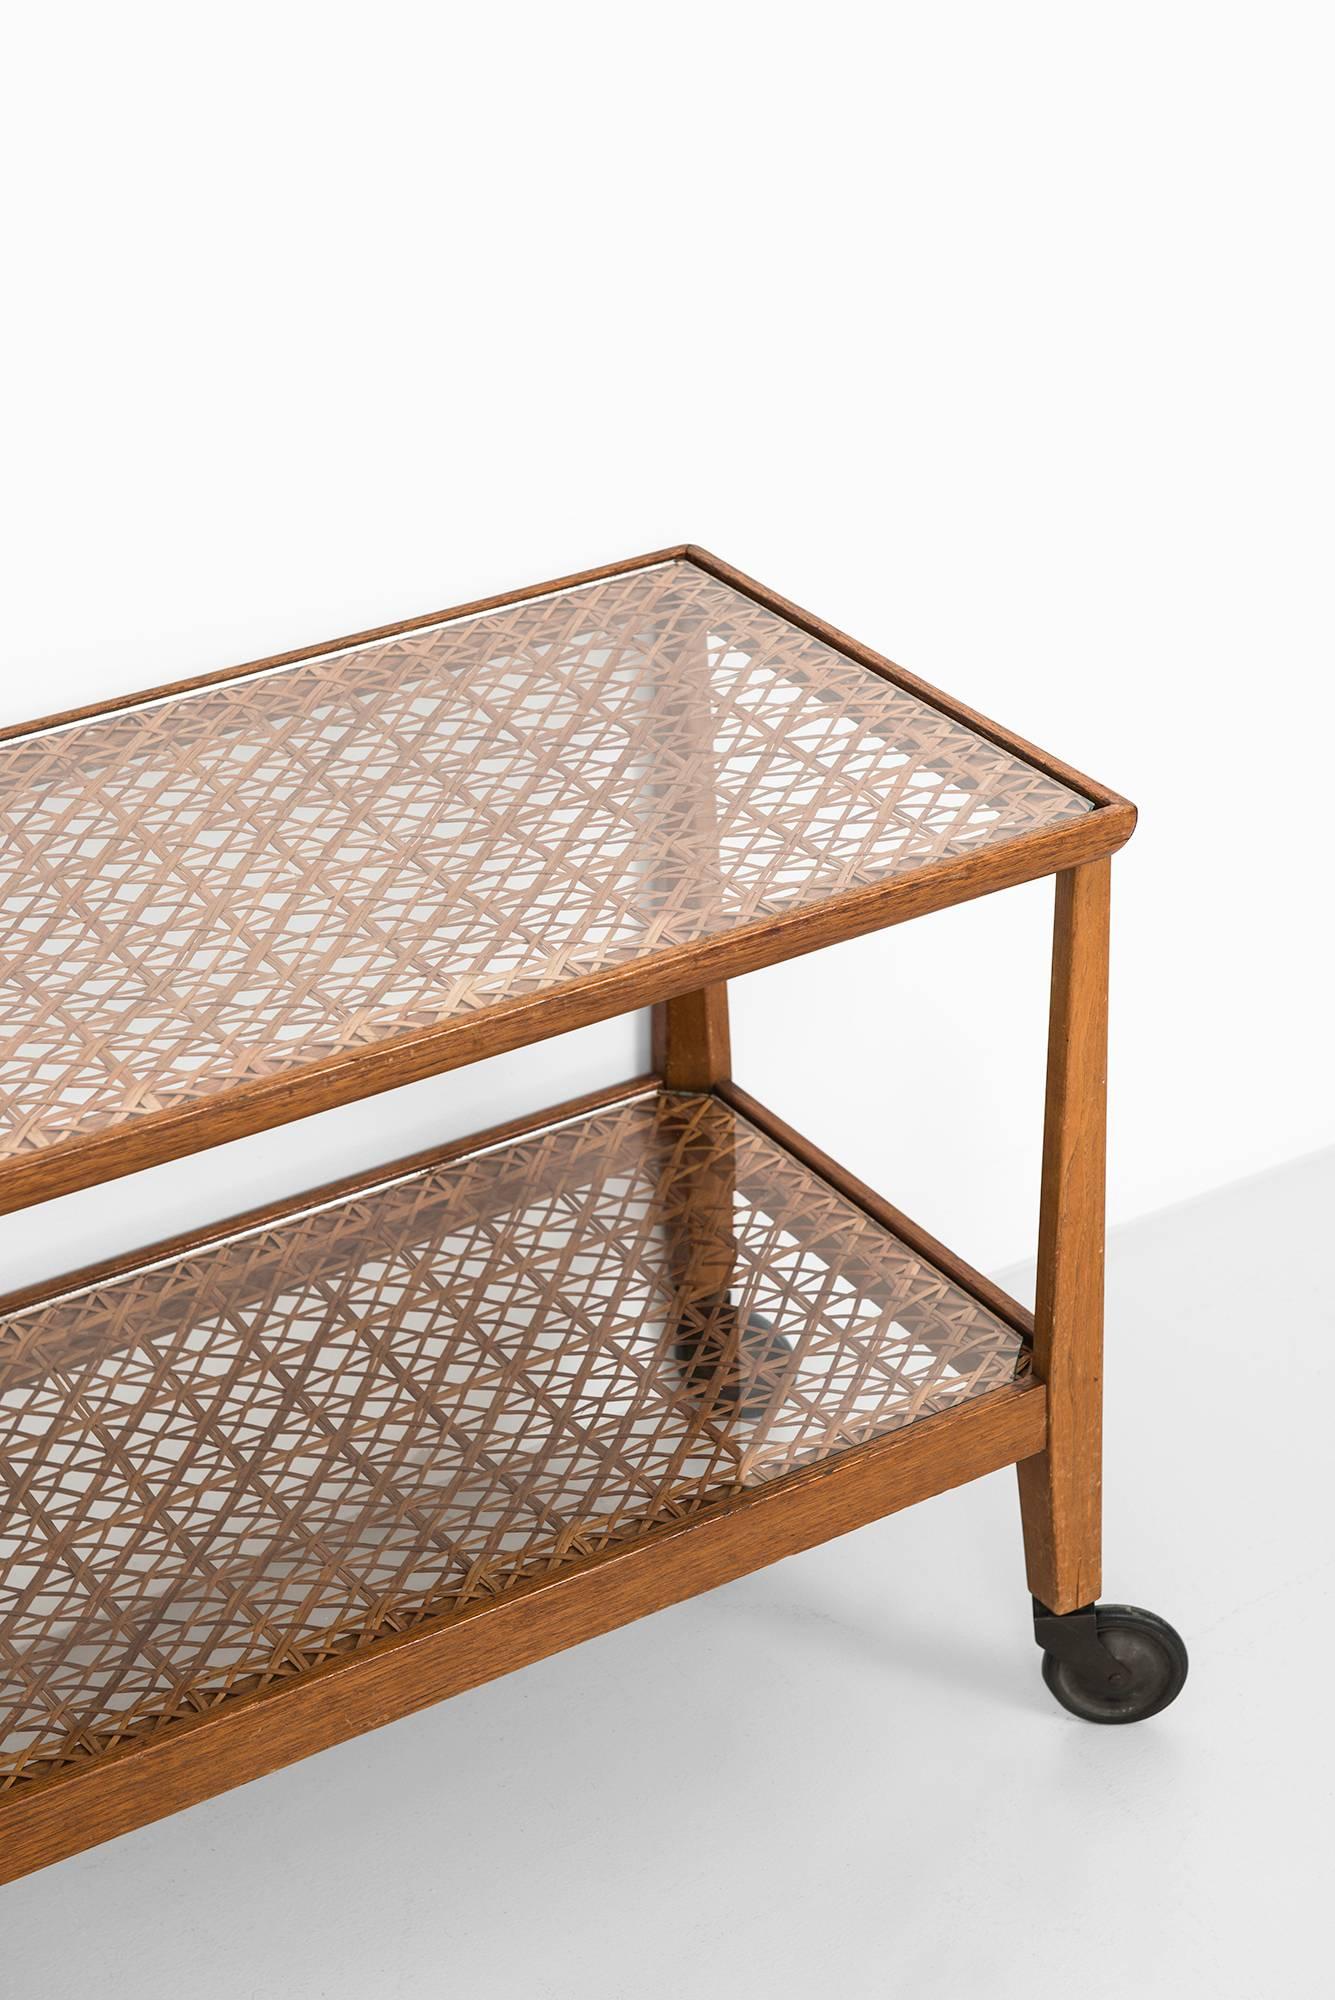 Rare trolley in the manner of Josef Frank. Probably produced in Sweden.